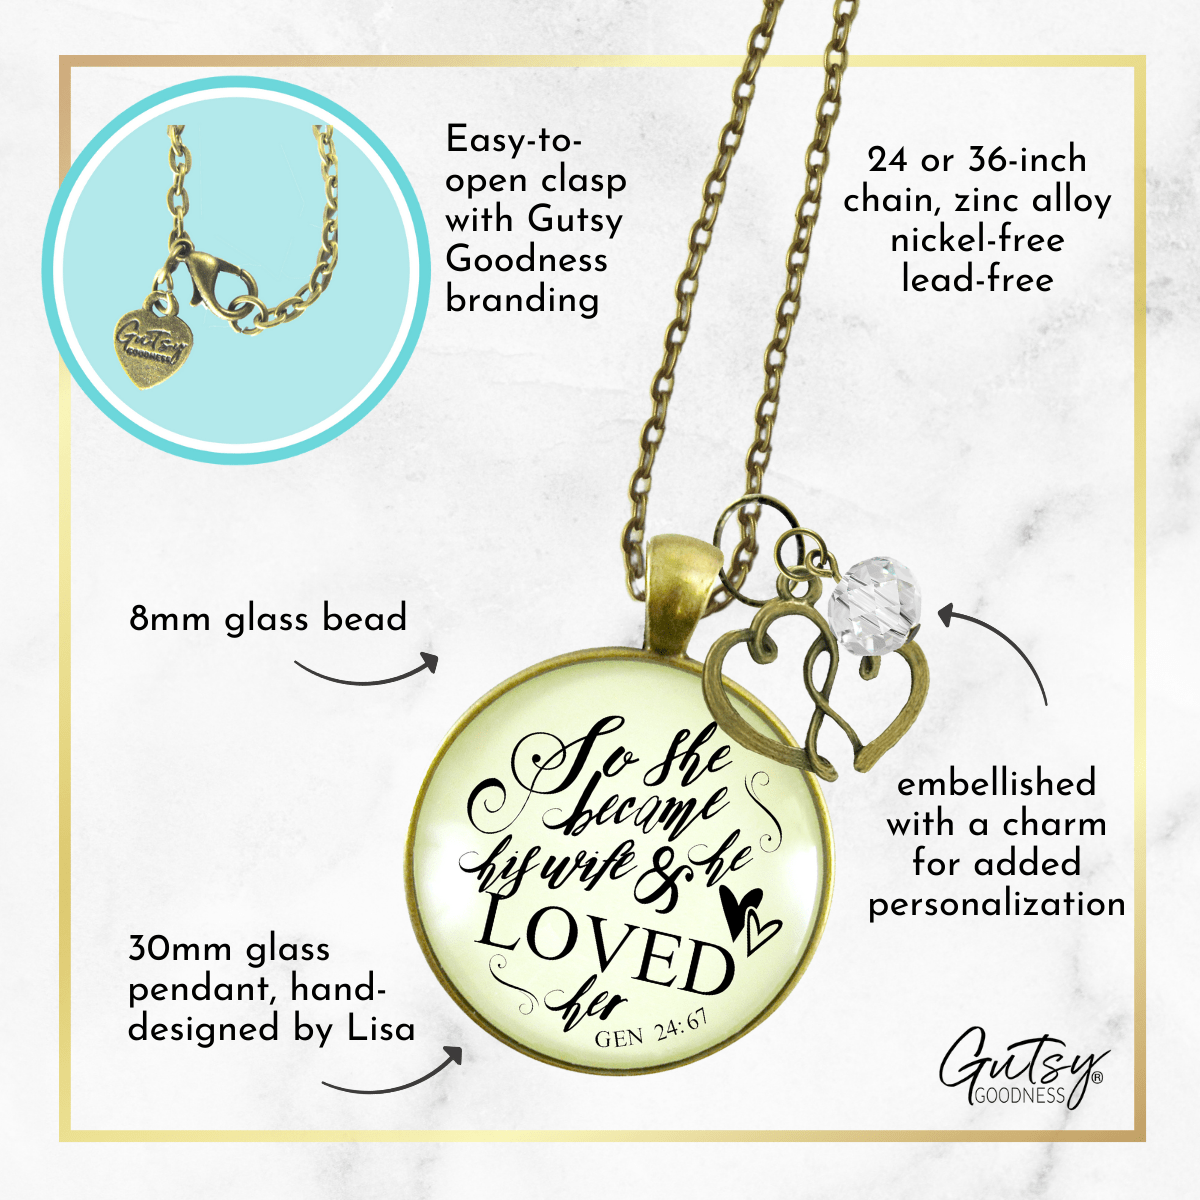 Gutsy Goodness Love My Wife Necklace Faith Inspired Quote Meaningful Anniversary Jewelry - Gutsy Goodness Handmade Jewelry;So She Became His Wife And He Loved Her - Gutsy Goodness Handmade Jewelry Gifts